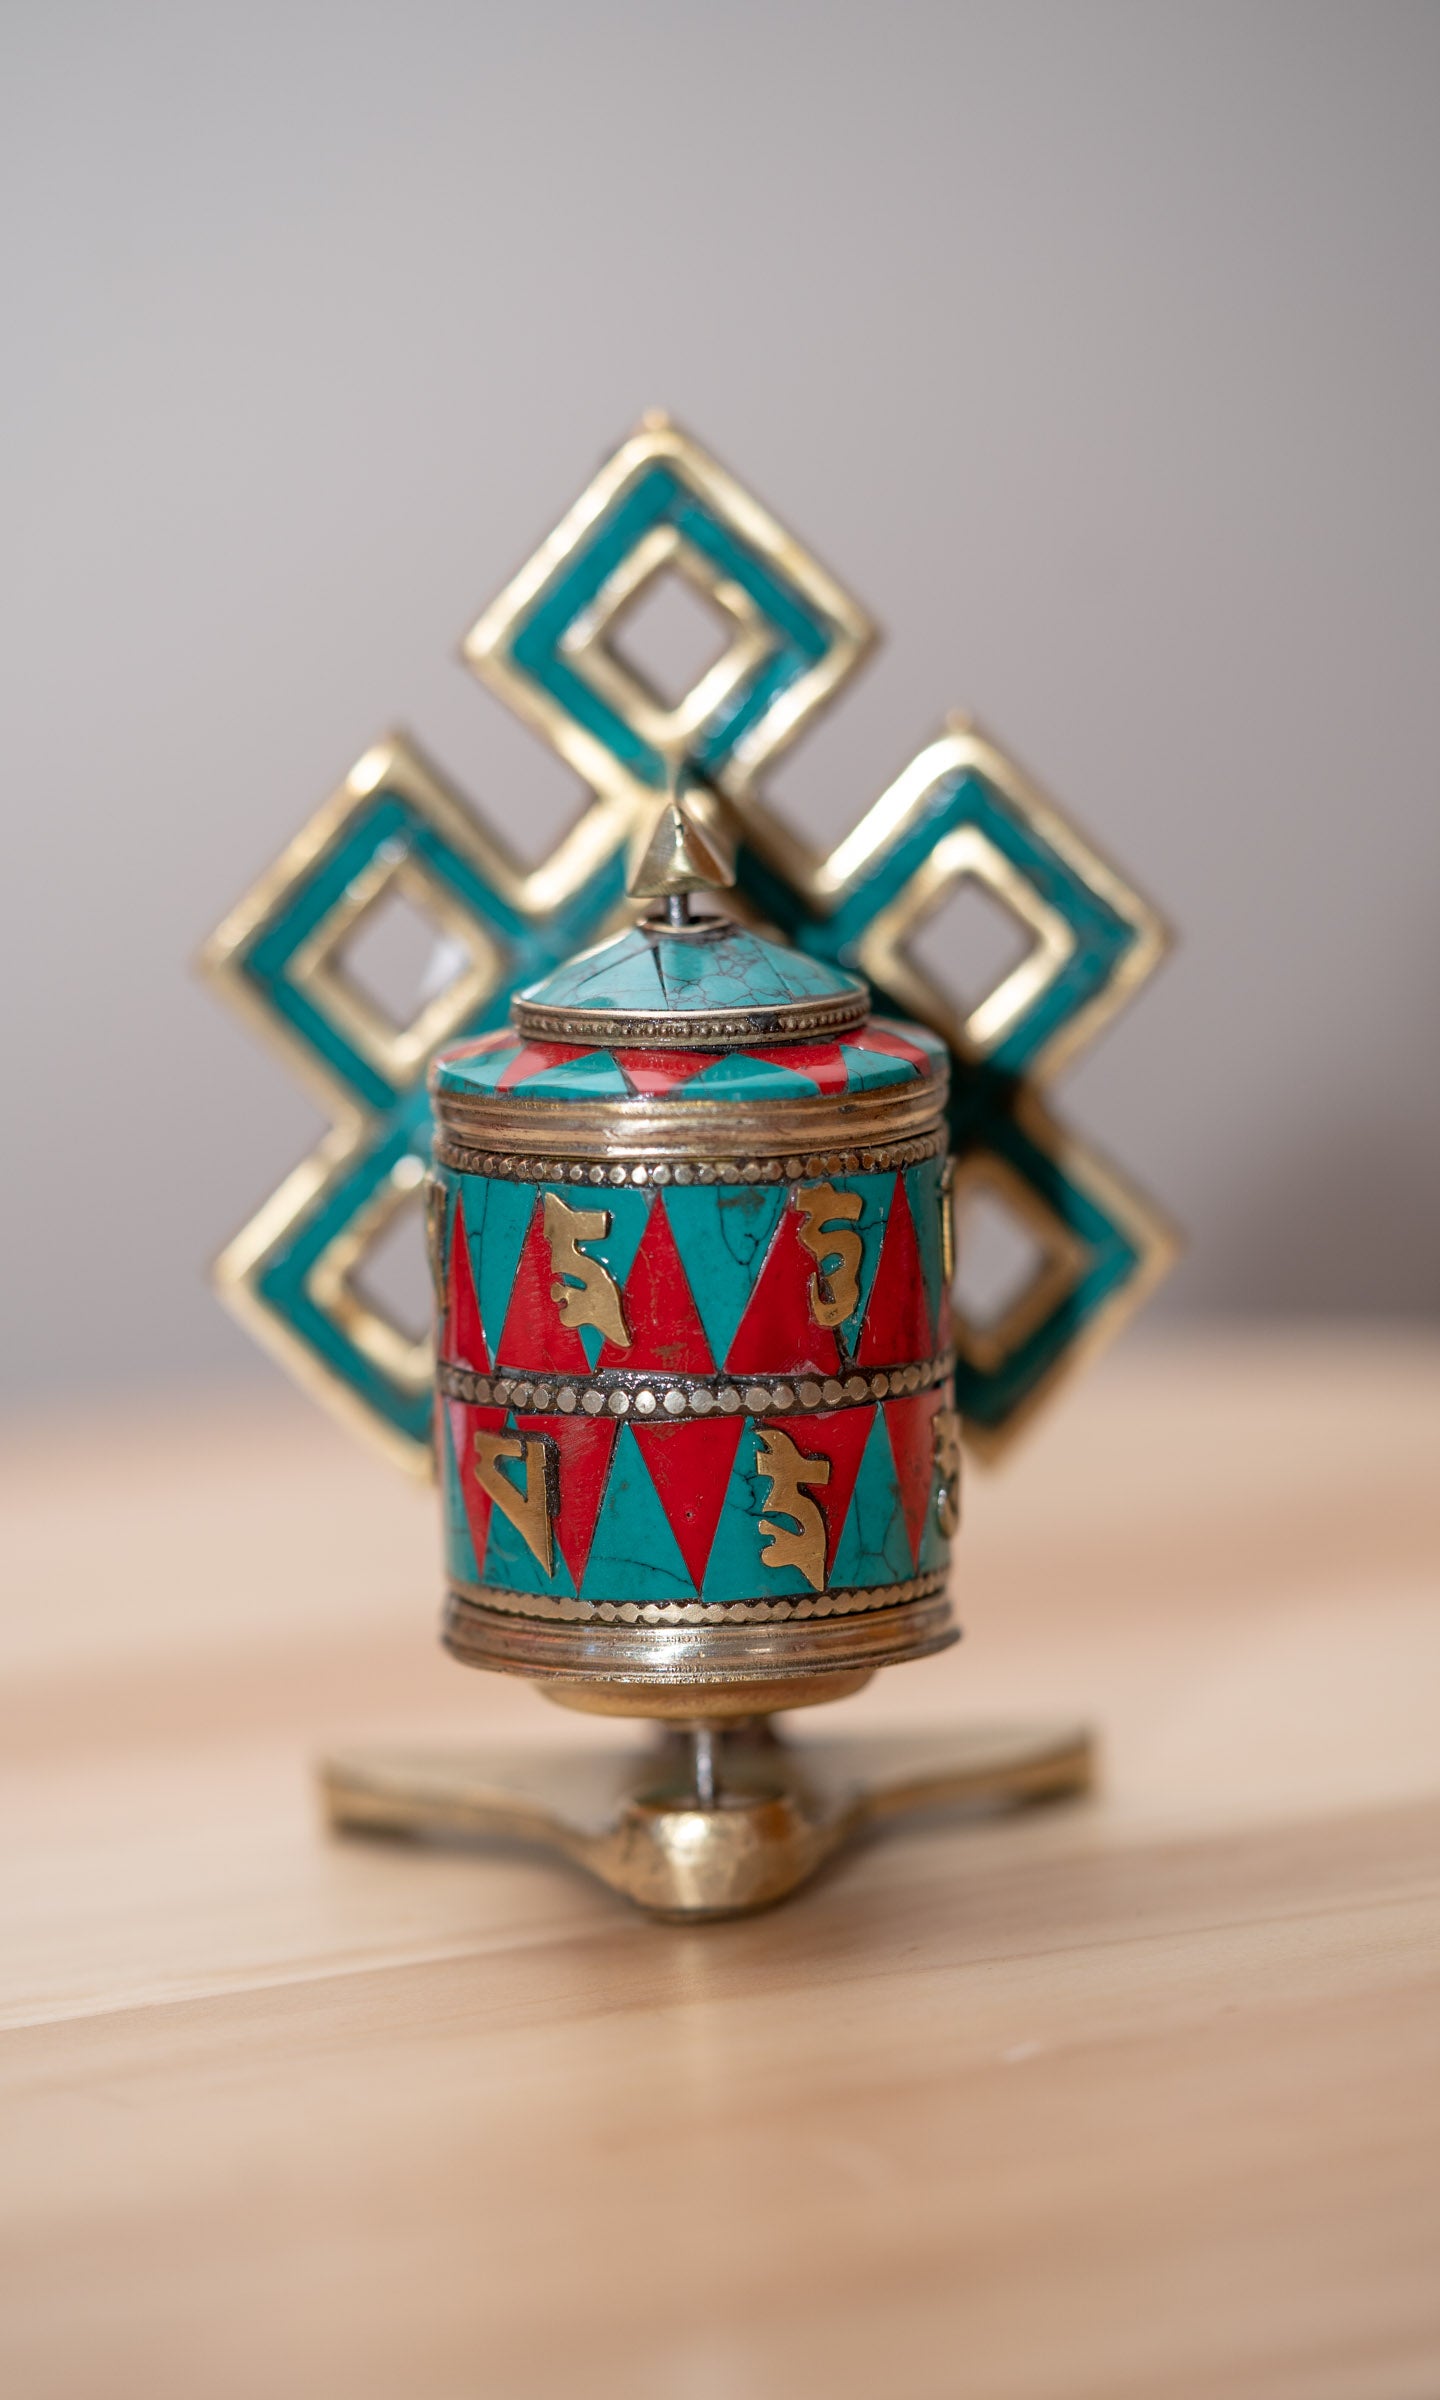 Endless Knot Prayer Wheel serves as a means to cultivate mindfulness and focus. 